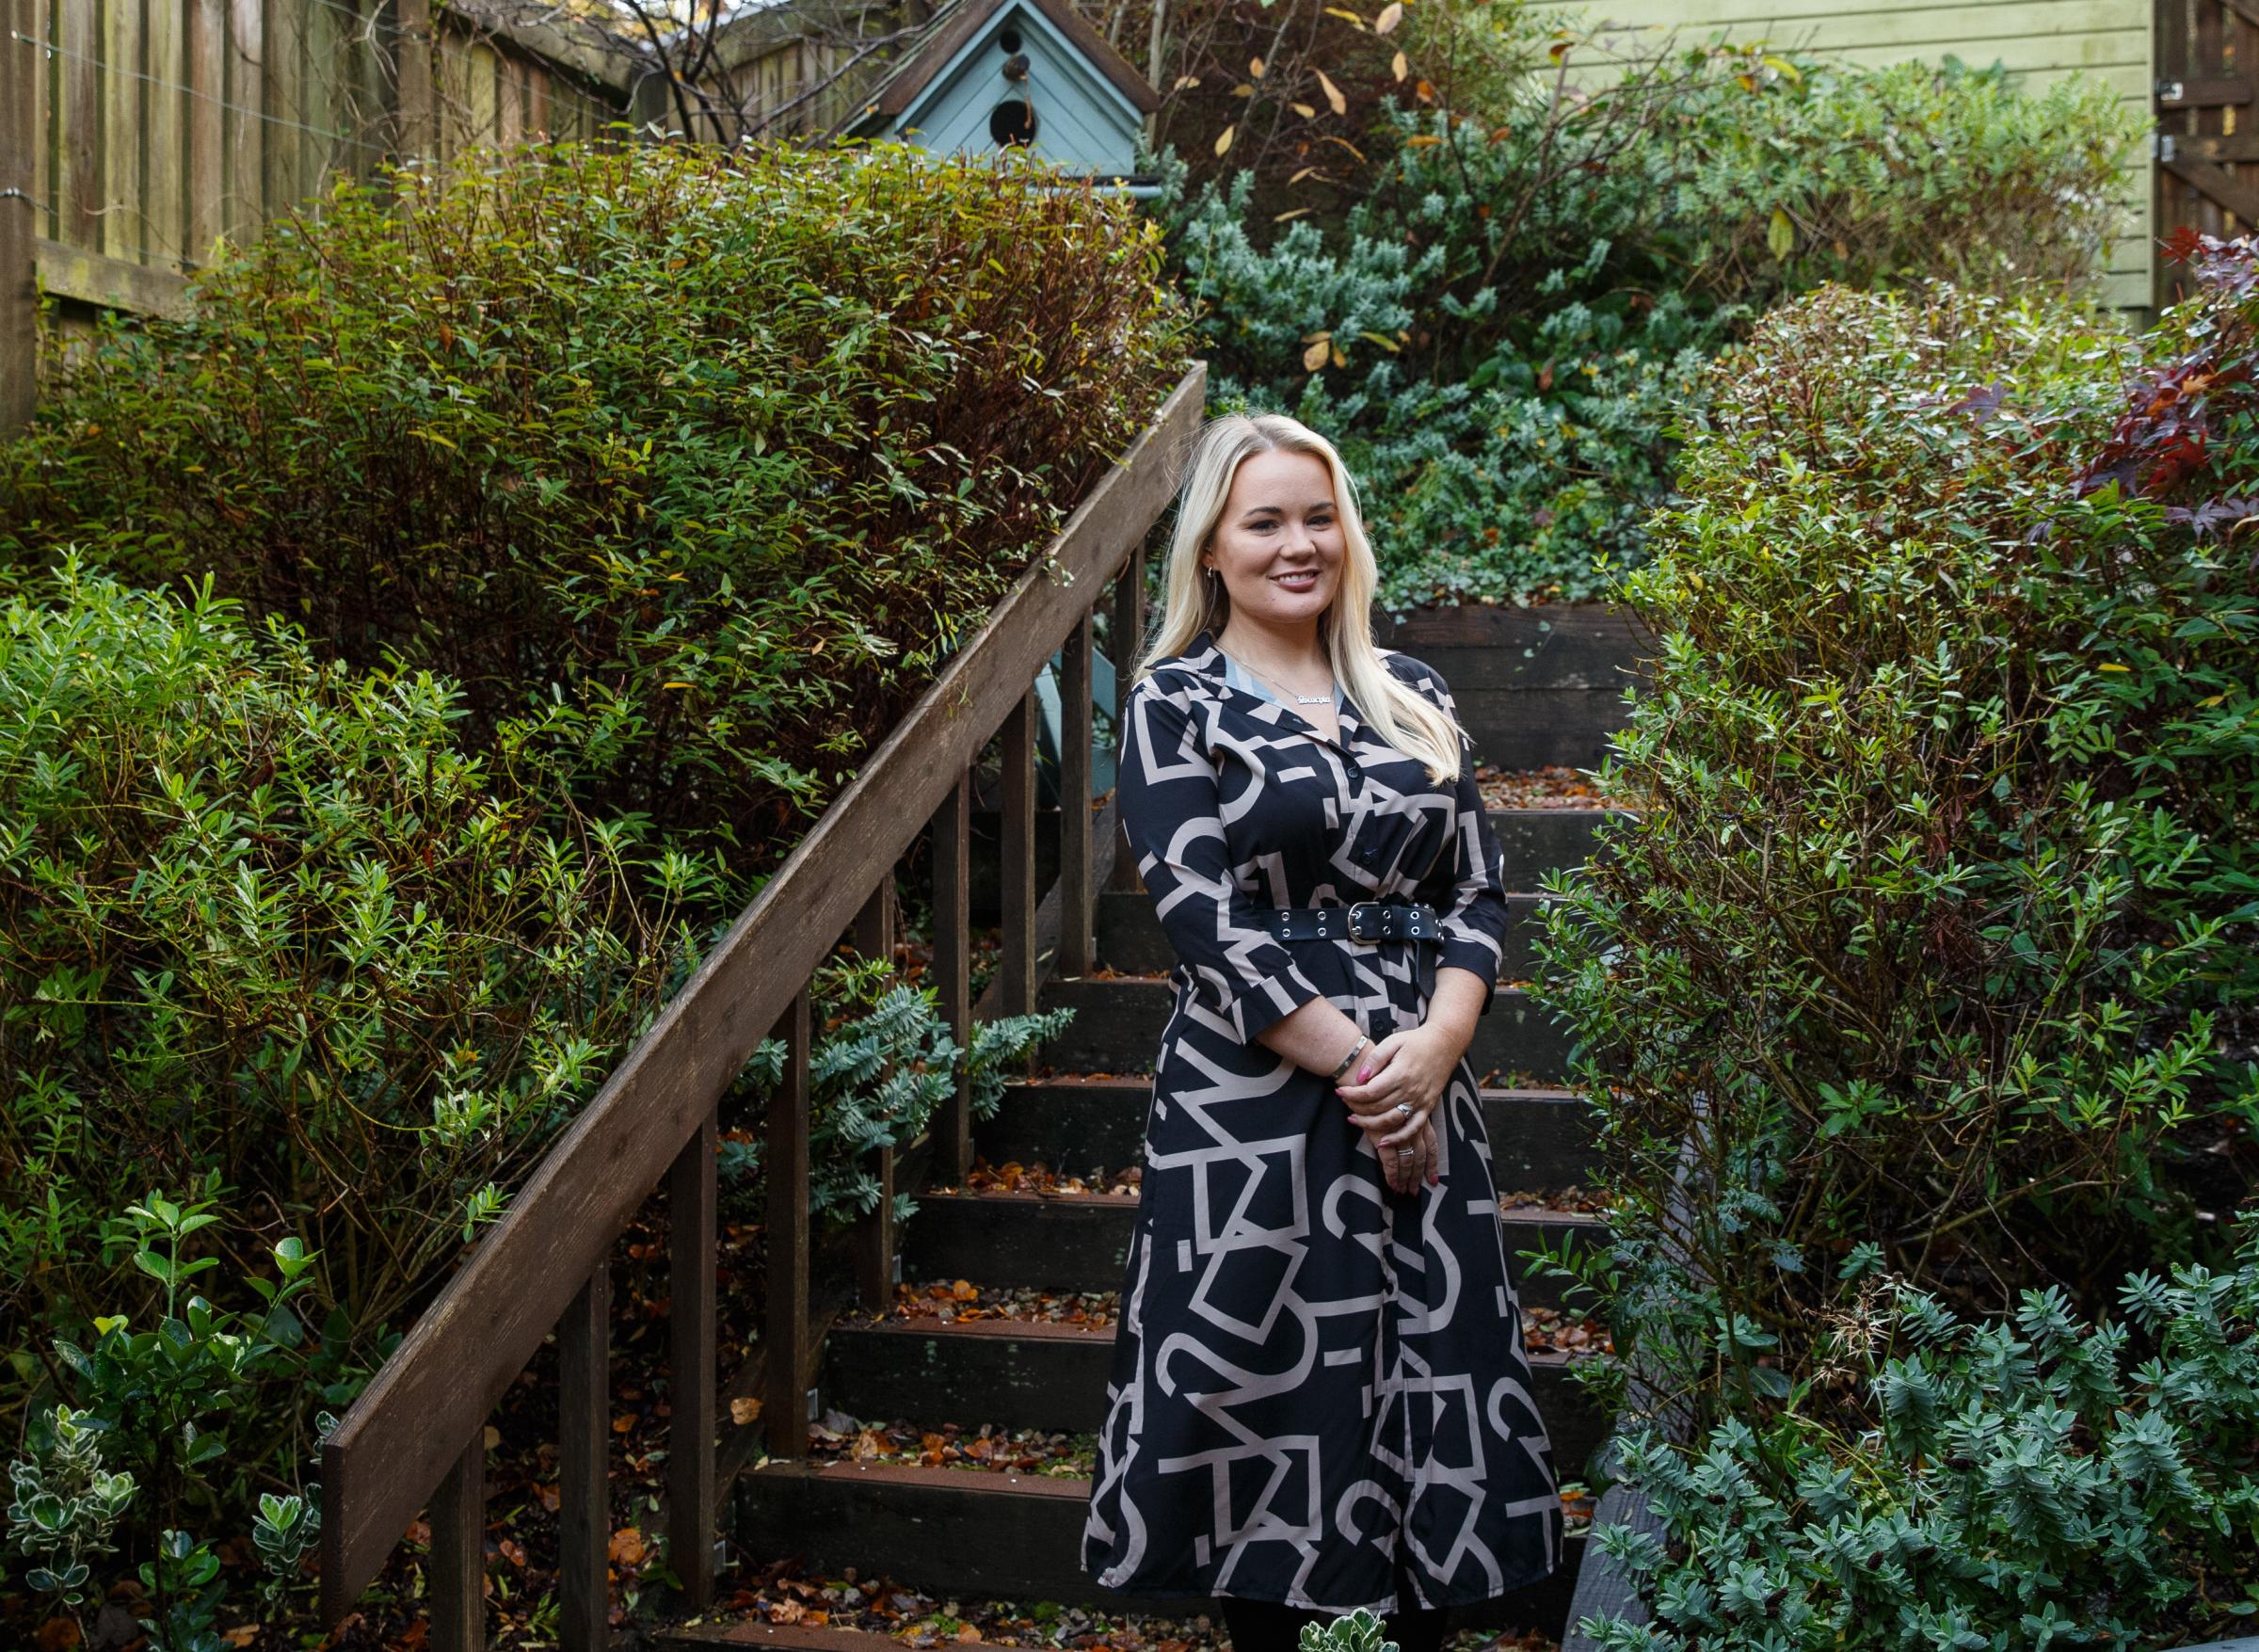 Cancer Support Scotland fundraising manager Emma Connor pictured in the garden at the charitys Calman Centre in the grounds of Gartnavel Hospital, Glasgow. Photograph by Colin Mearns.